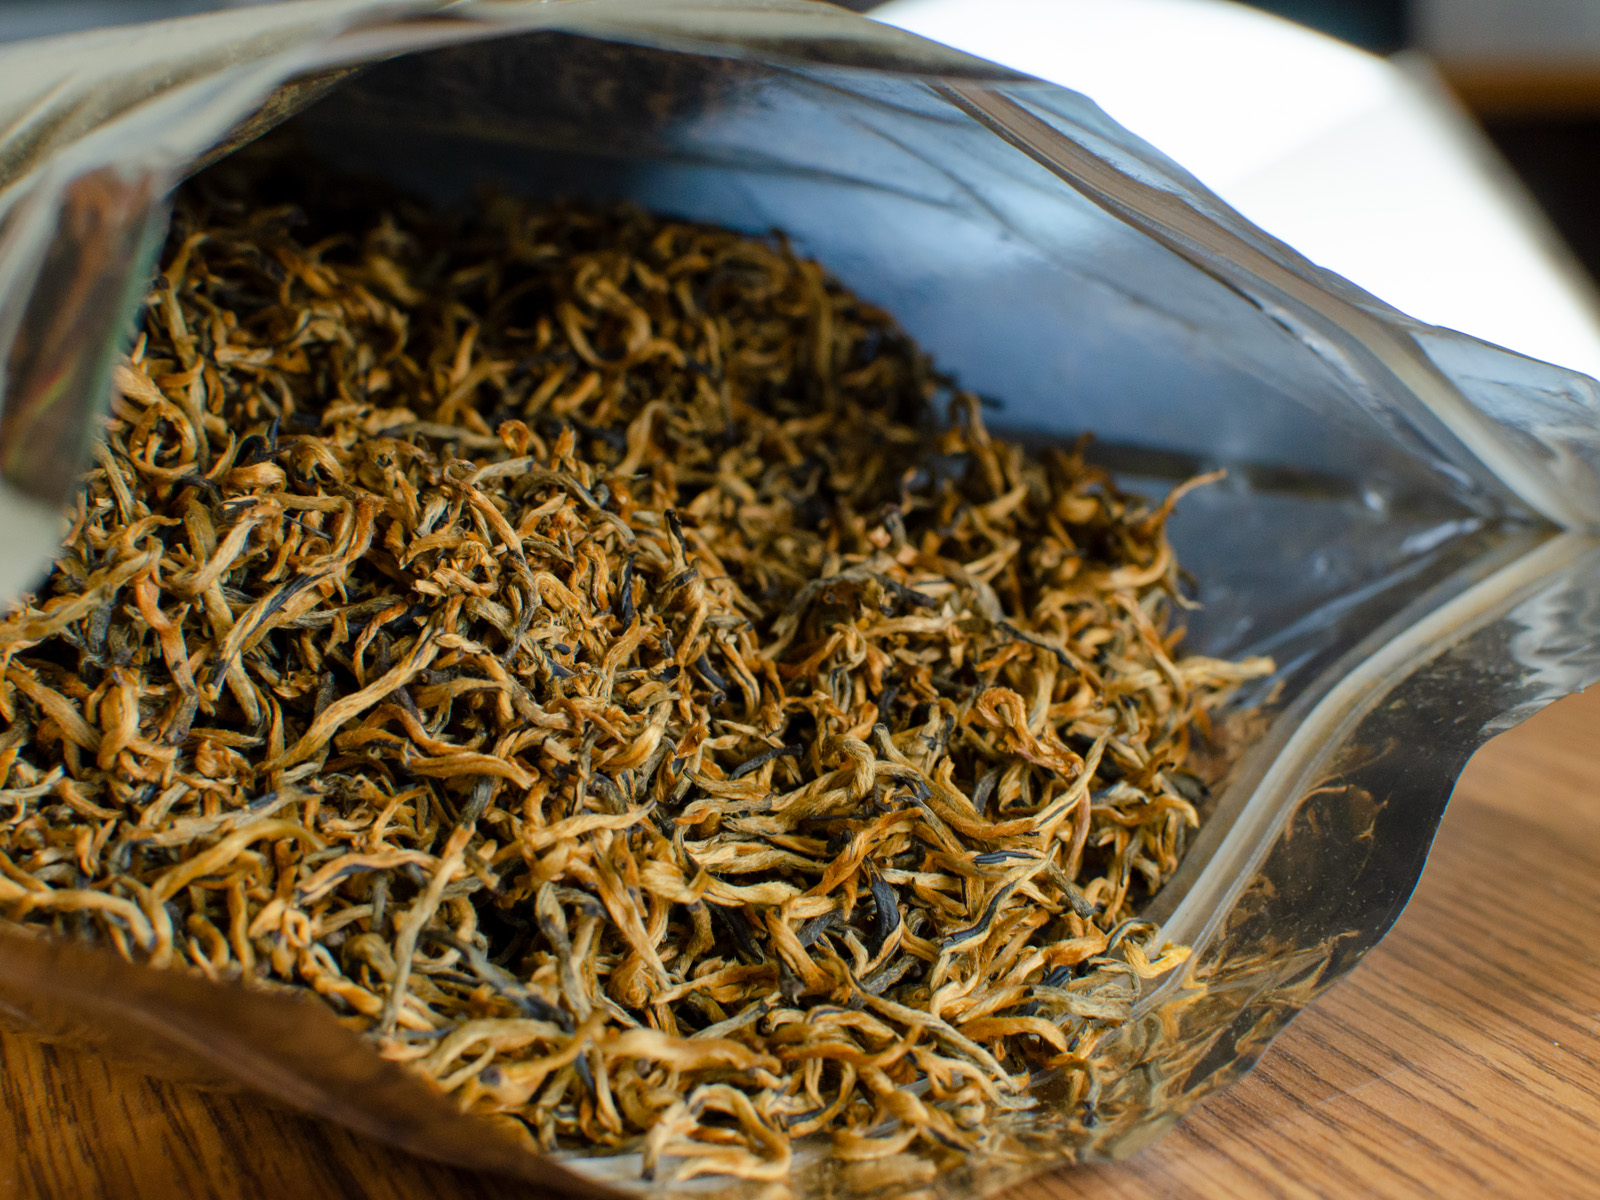 A package of freshly opened Jinya (Yunnan Golden Buds) black tea with the dry leaves spilling out of the silvery zipper bag.